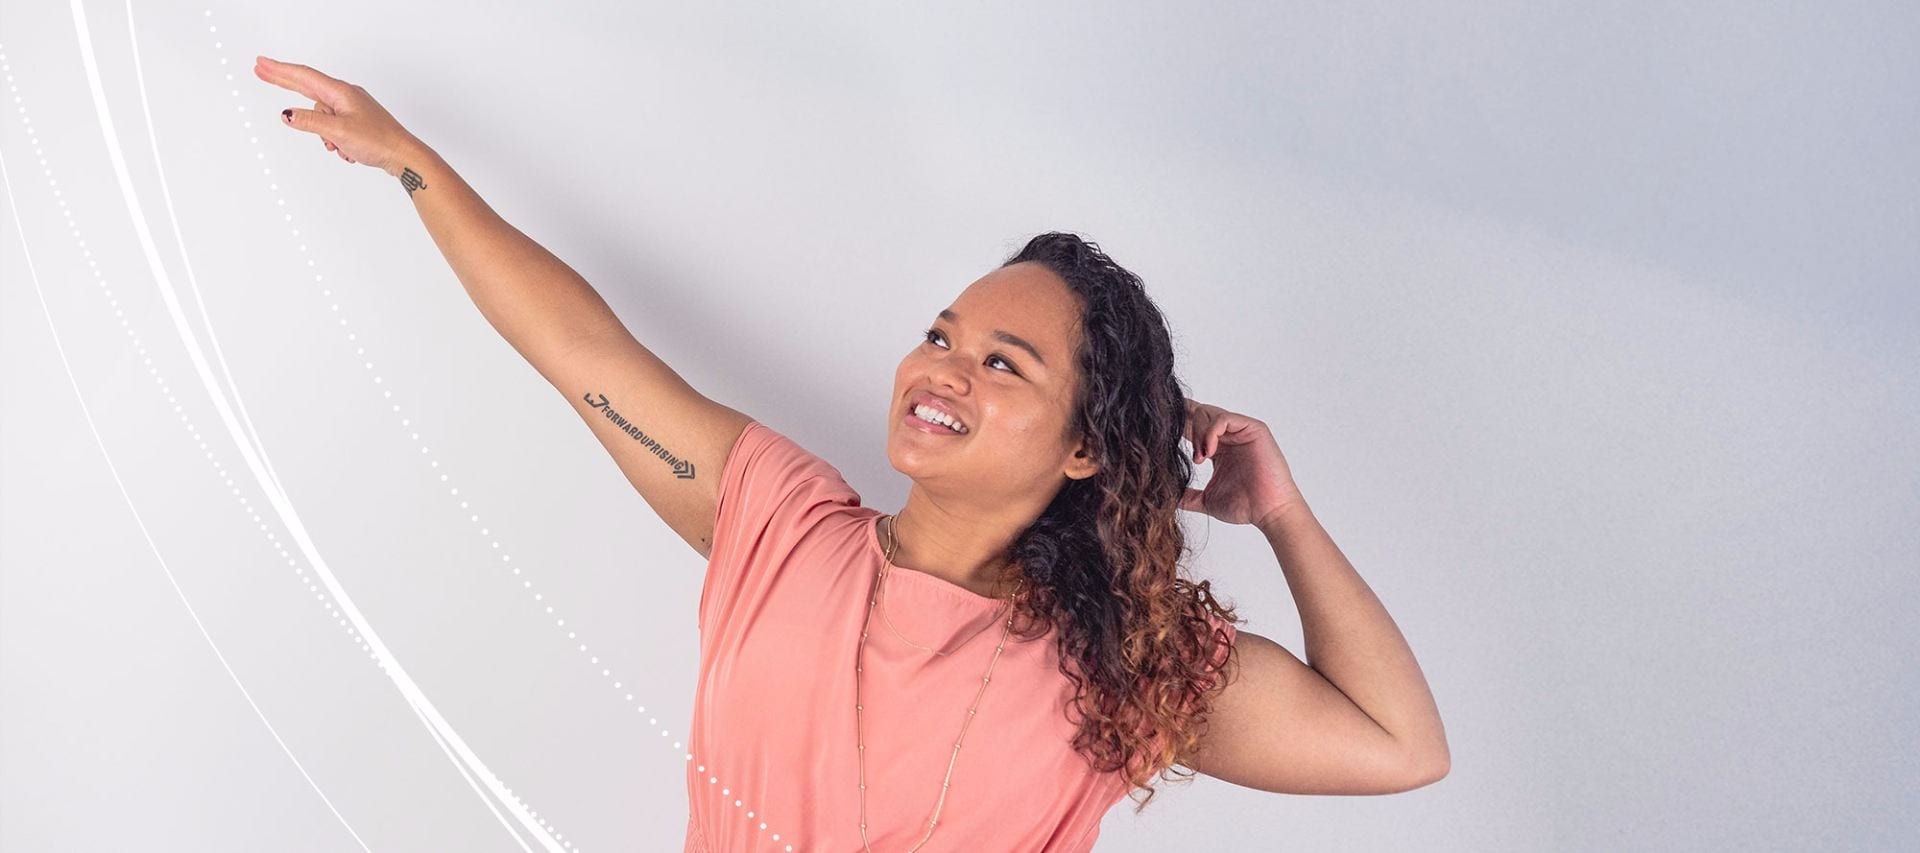 Penn State student Jacquiline Cana pointing upwards while agains a white background.